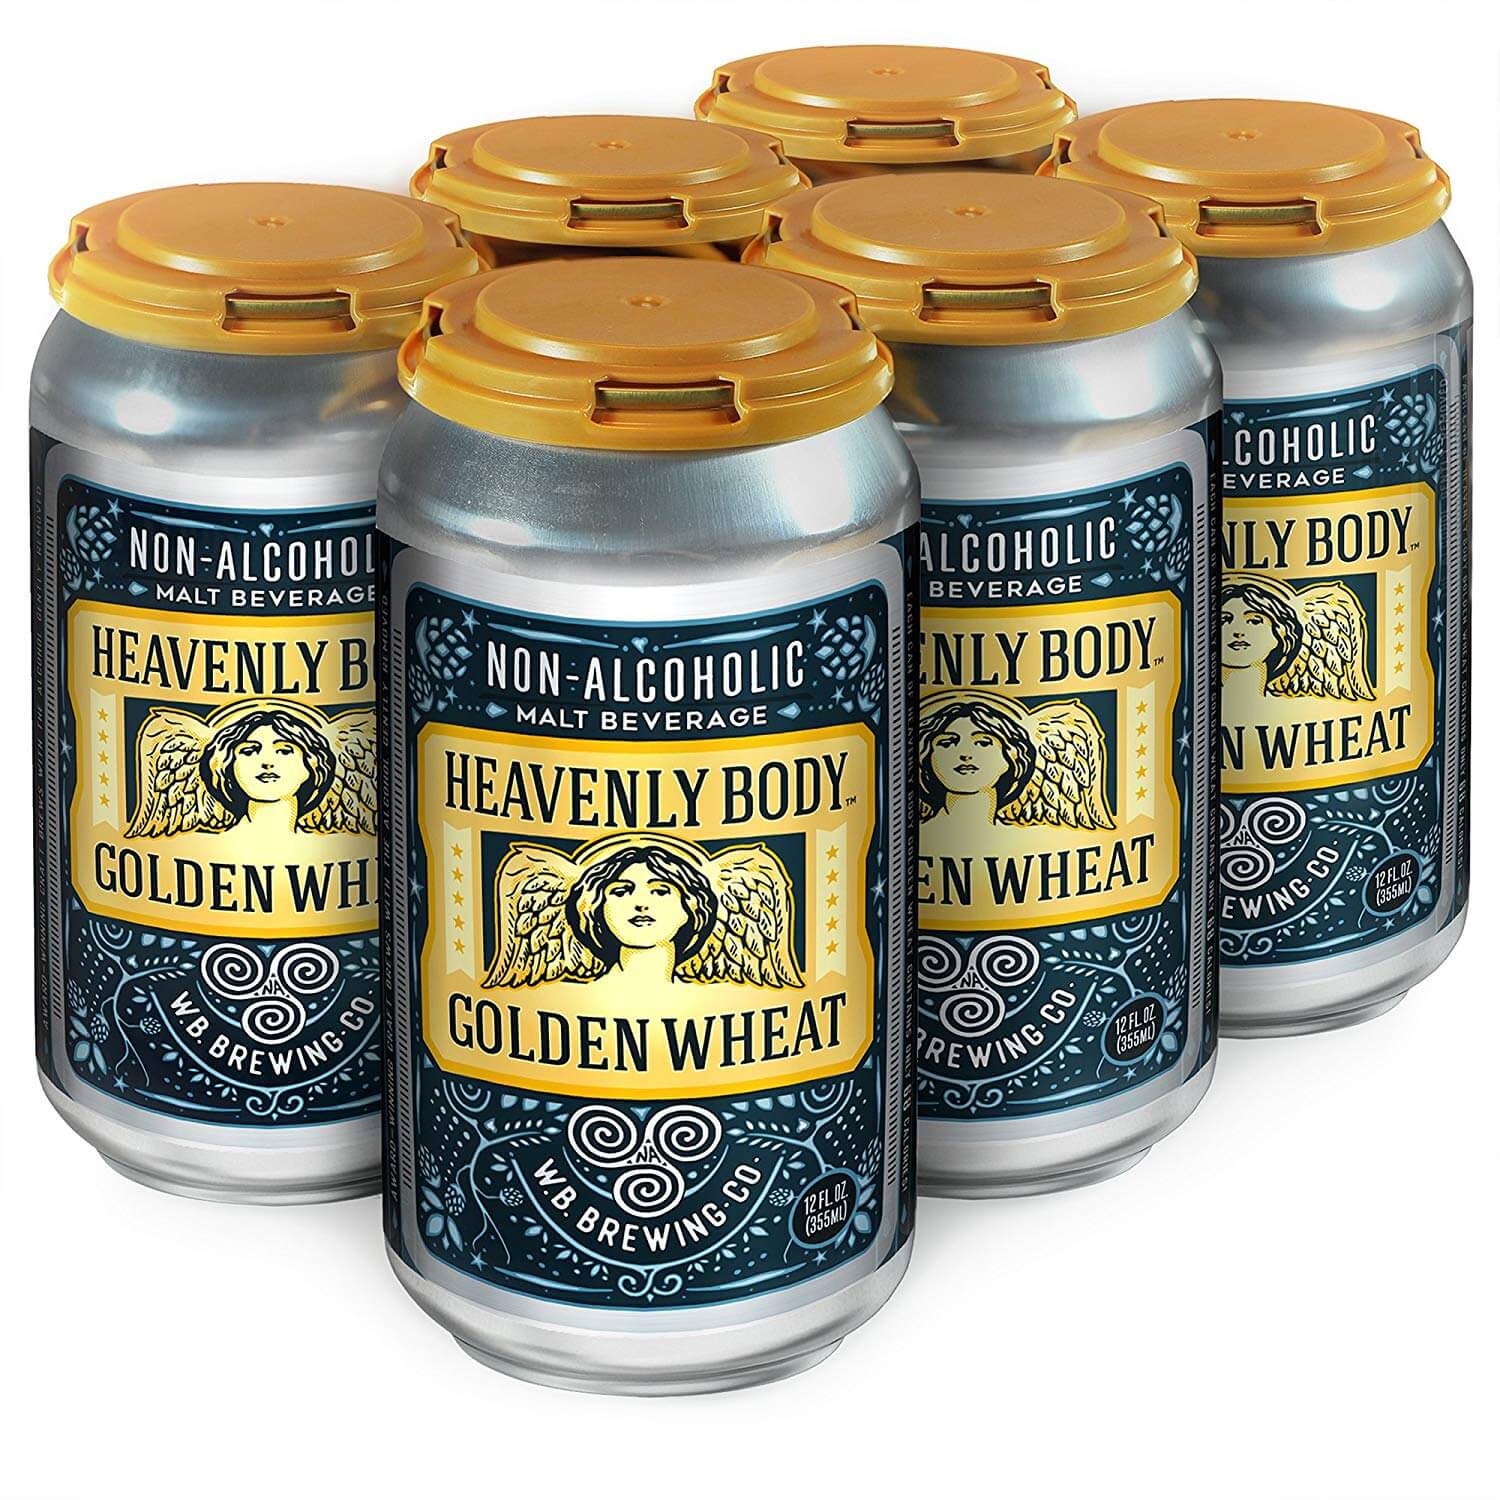 WELLBEING BREWING CO. Non-Alcoholic Craft Beer